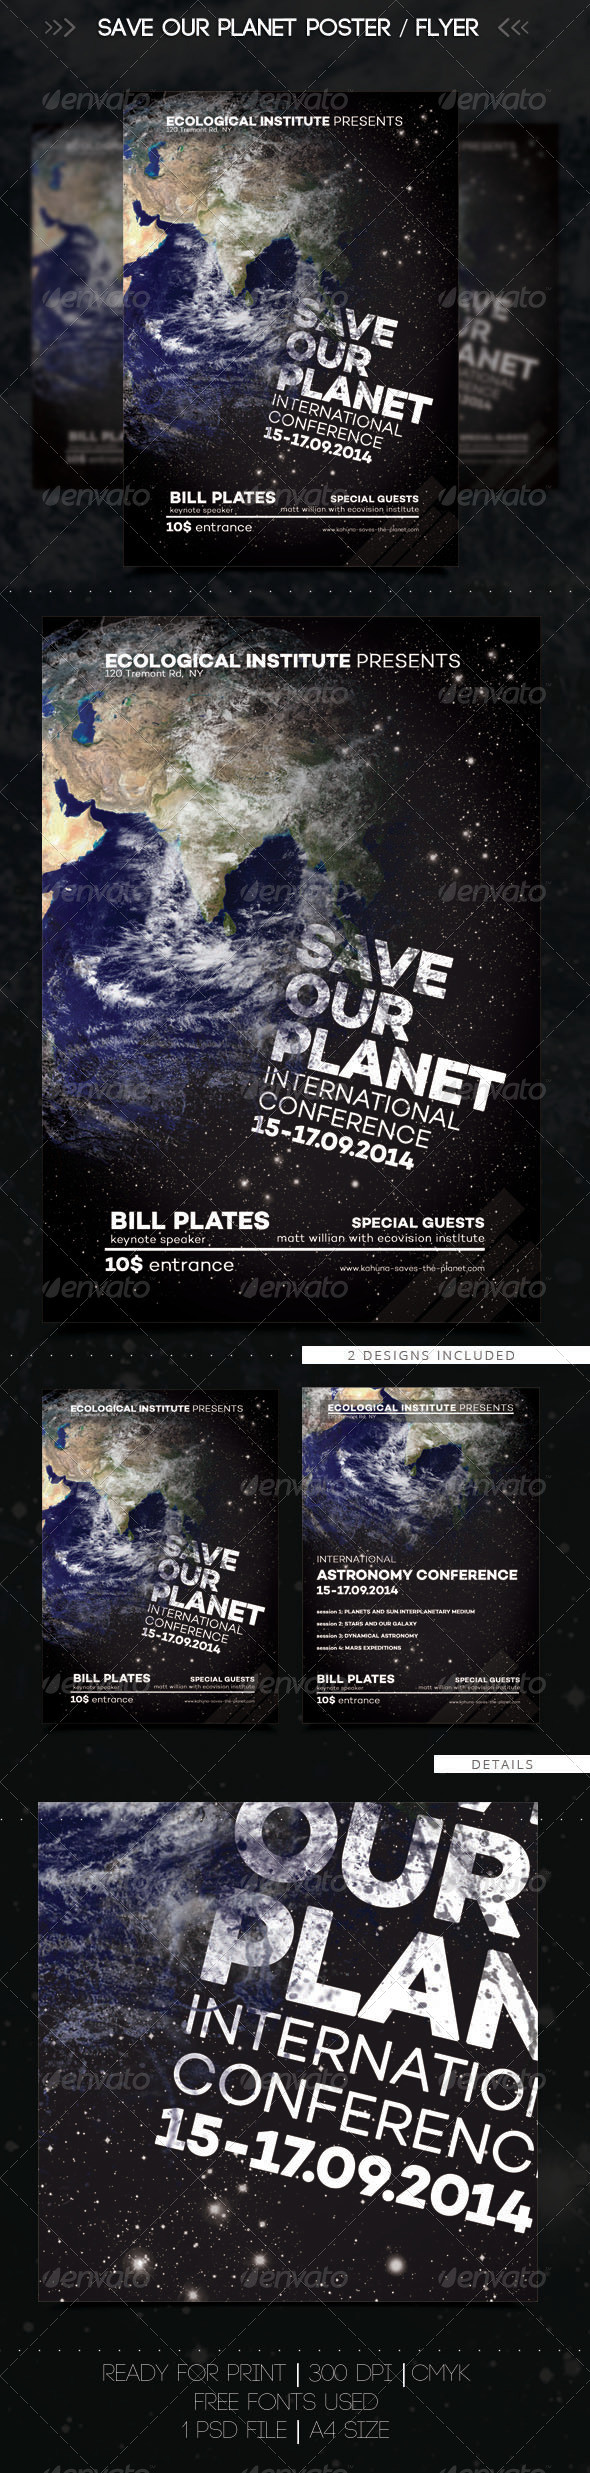 Save 20the 20planet preview